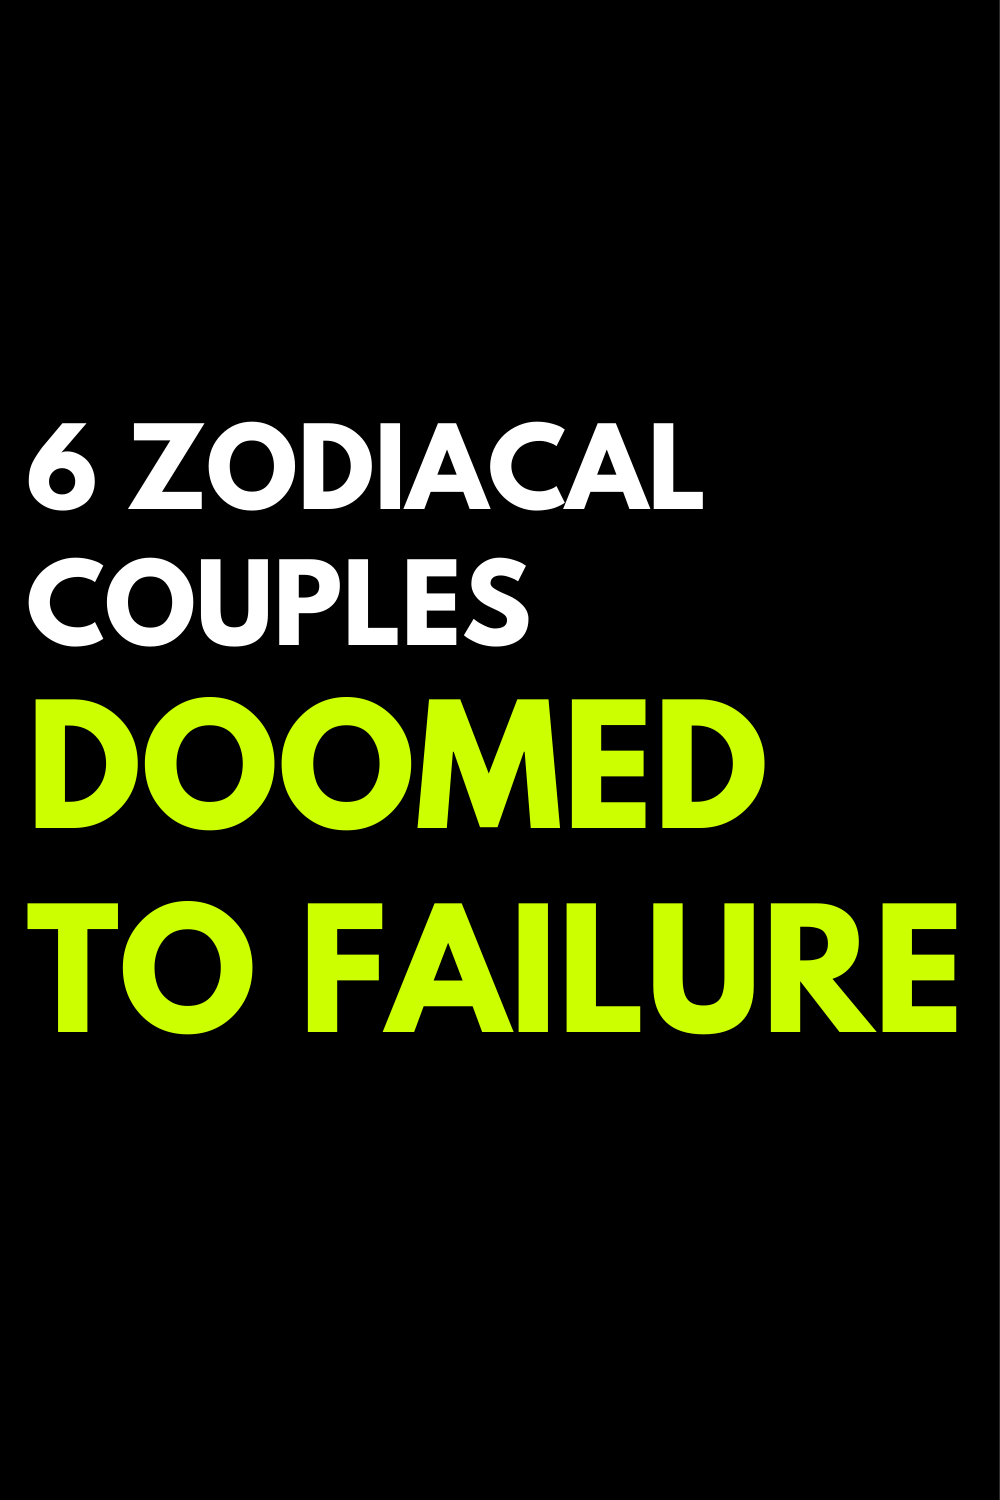 6 zodiacal couples doomed to failure